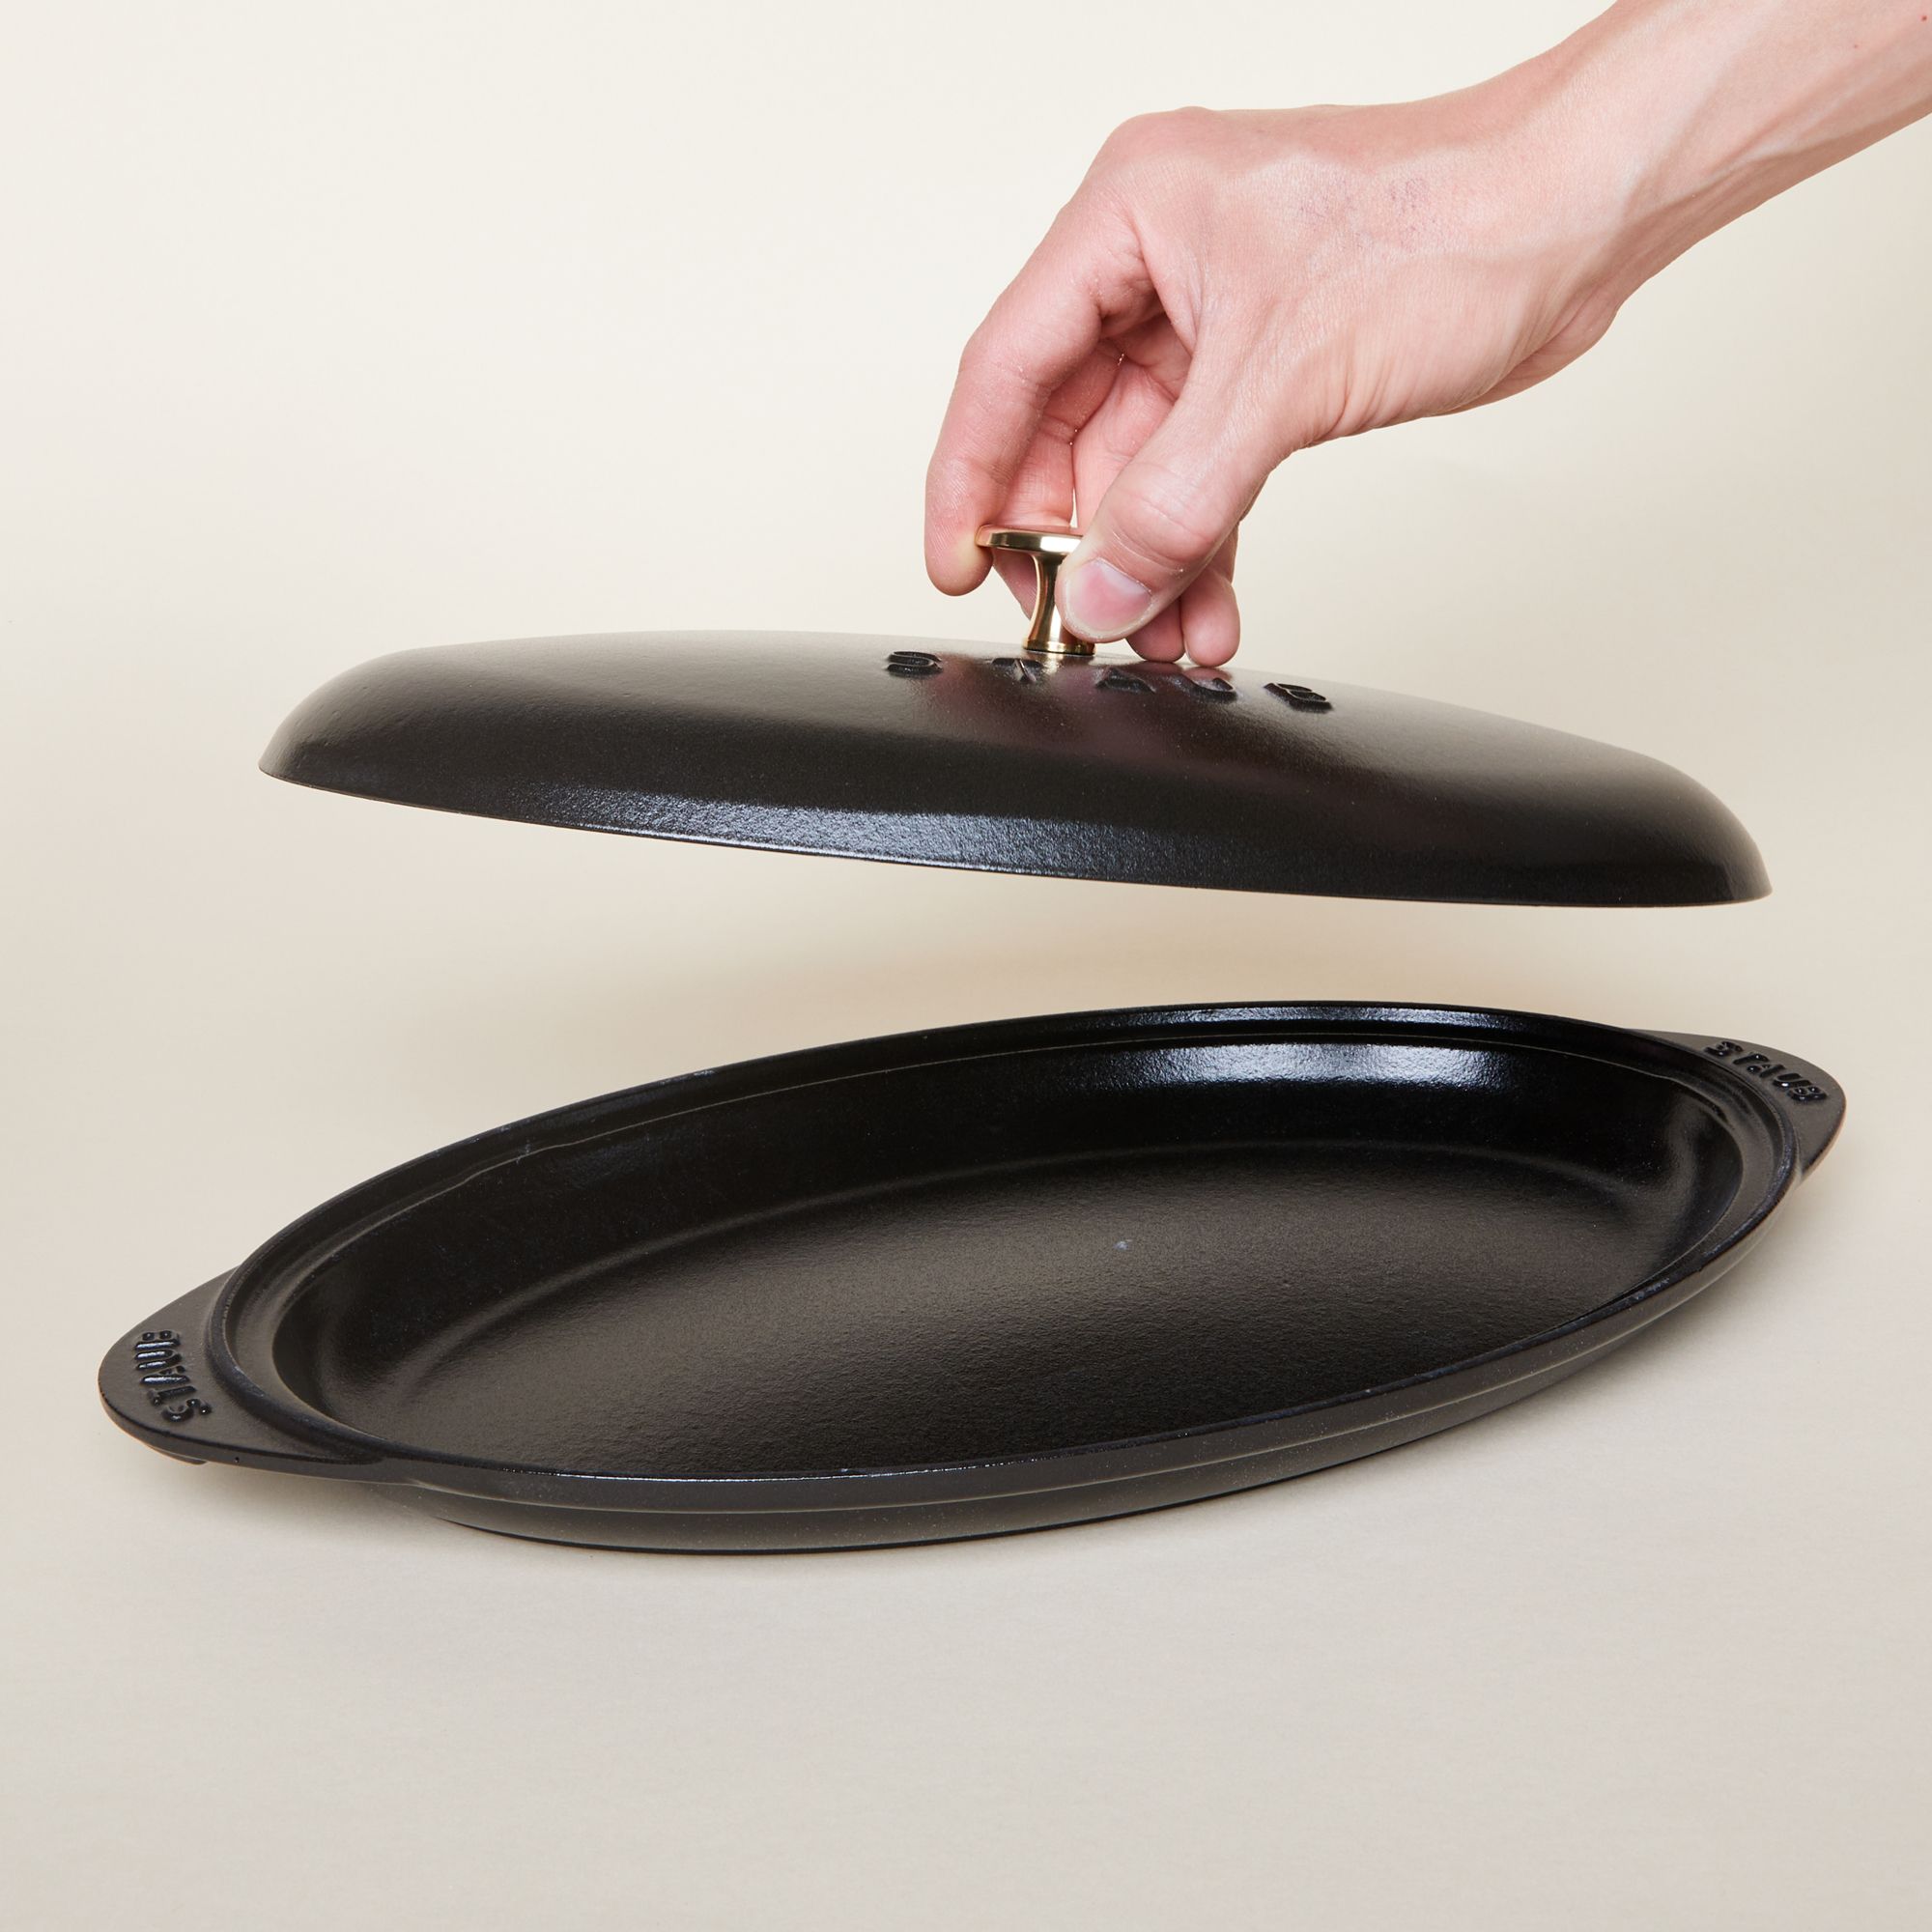 Black oval platter with hand holding the lid